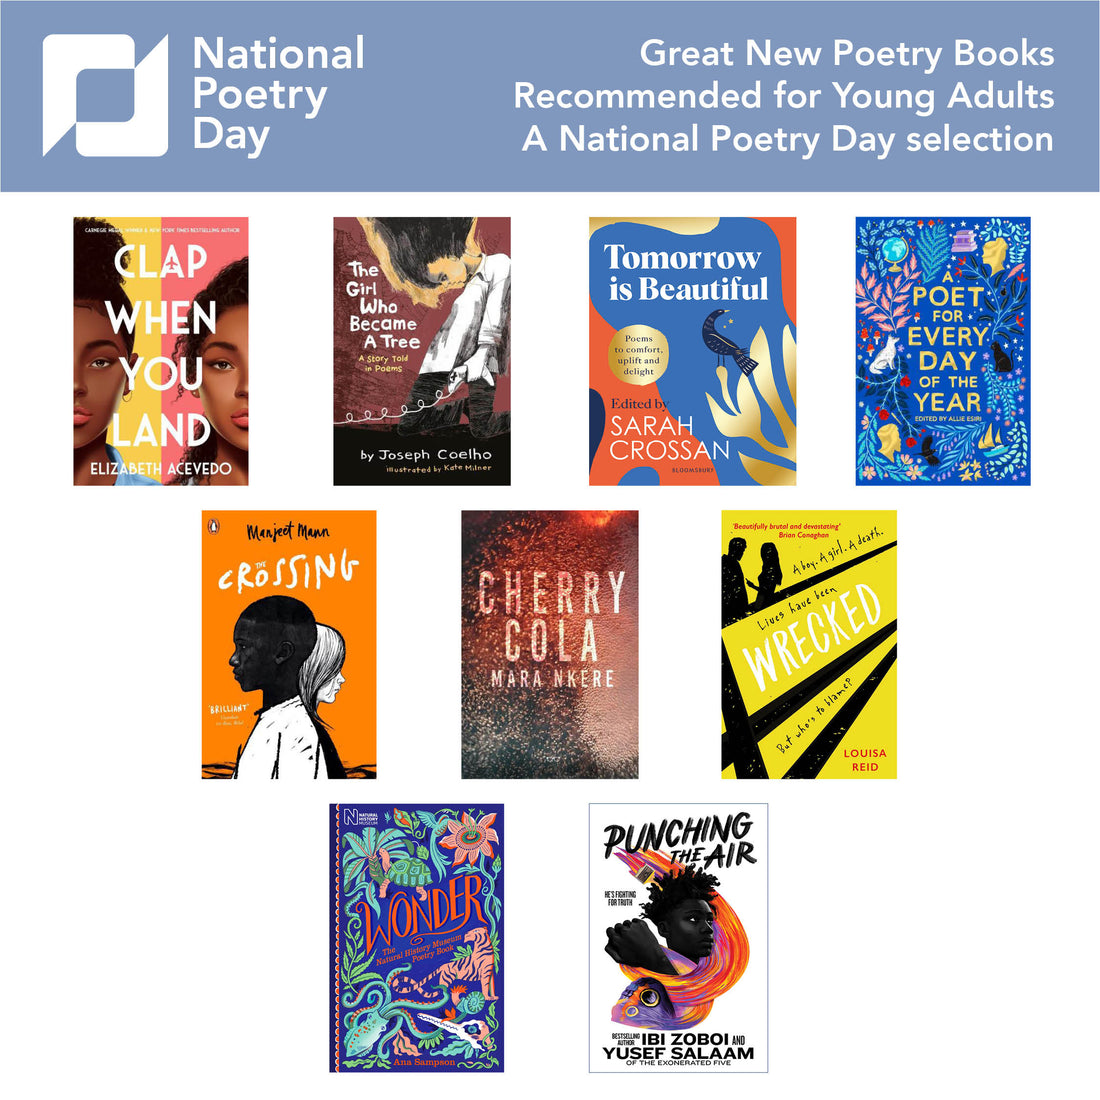 Two Of Our Poets Selected for National Poetry Day As Great New Books!